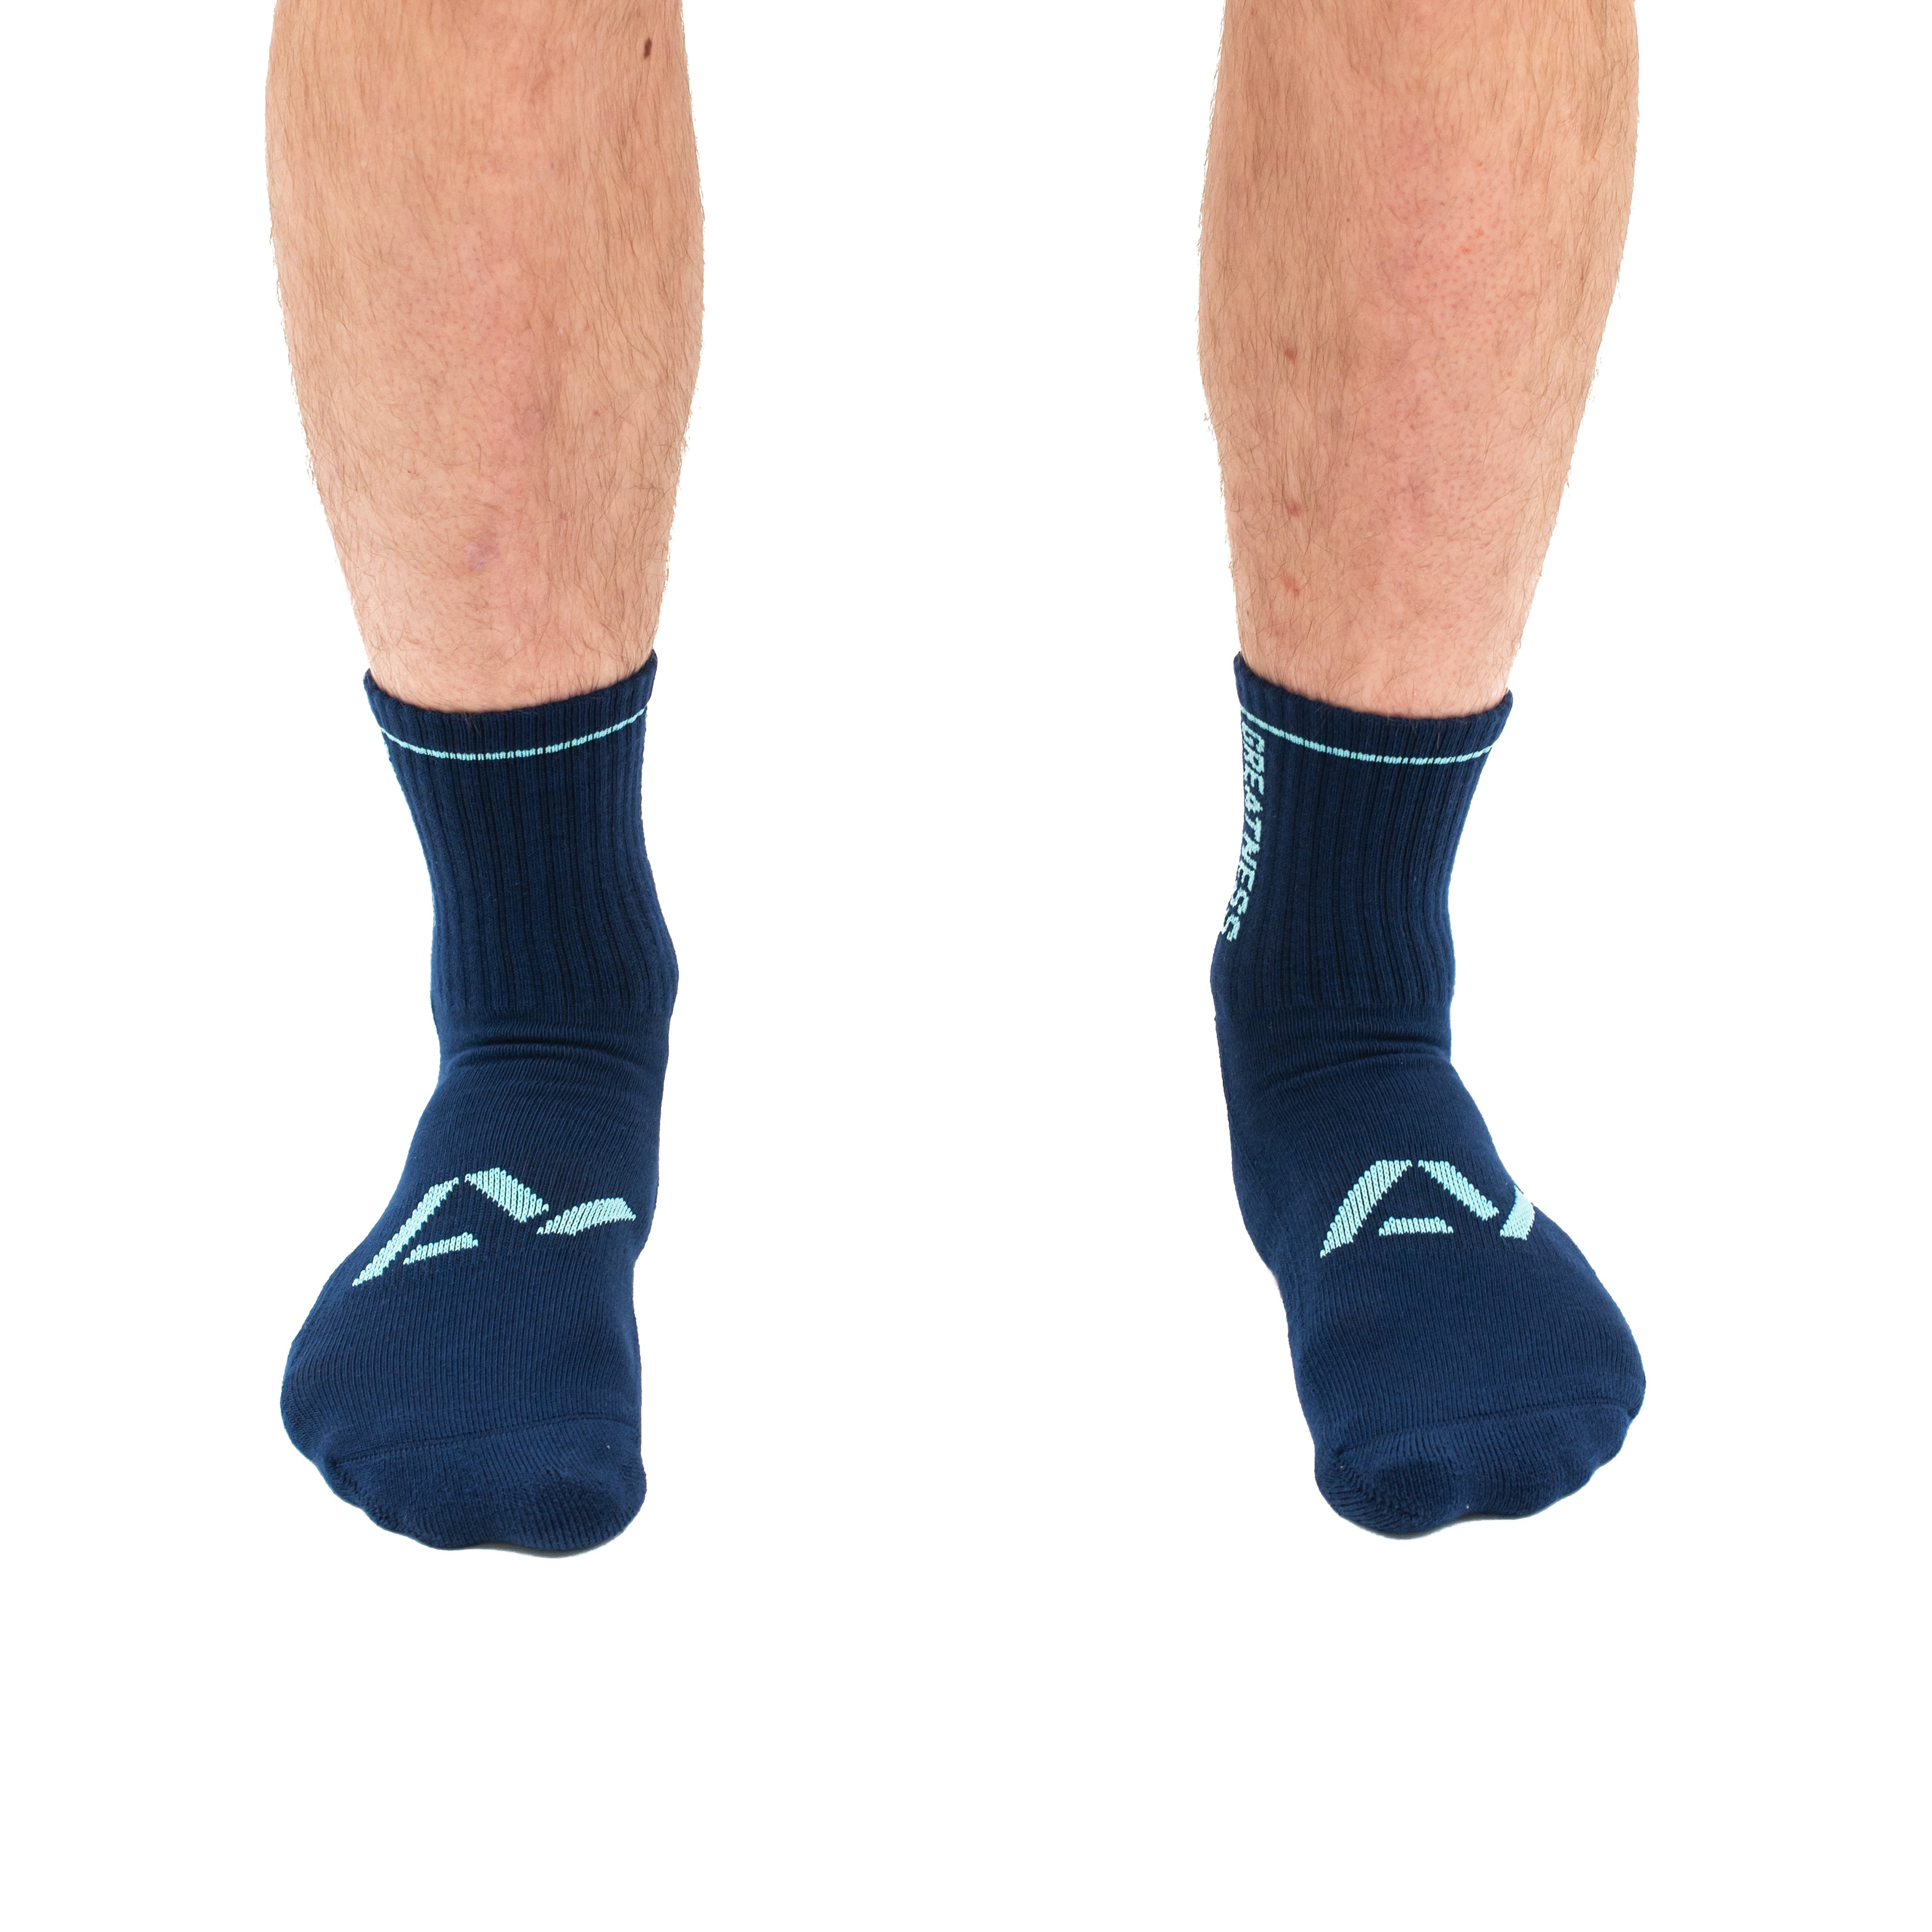 Your feet are important and durable crew socks are just as importing when out and about or in the gym. These Iced crew socks have a cushioned footbed, arch support and light compression of the ankle. A7 Crew socks are IPF Approved so a great addition to your IPF Approved Kit. A7 Crew socks shipping to Europe and the UK, Norway, Switzerland and Iceland.